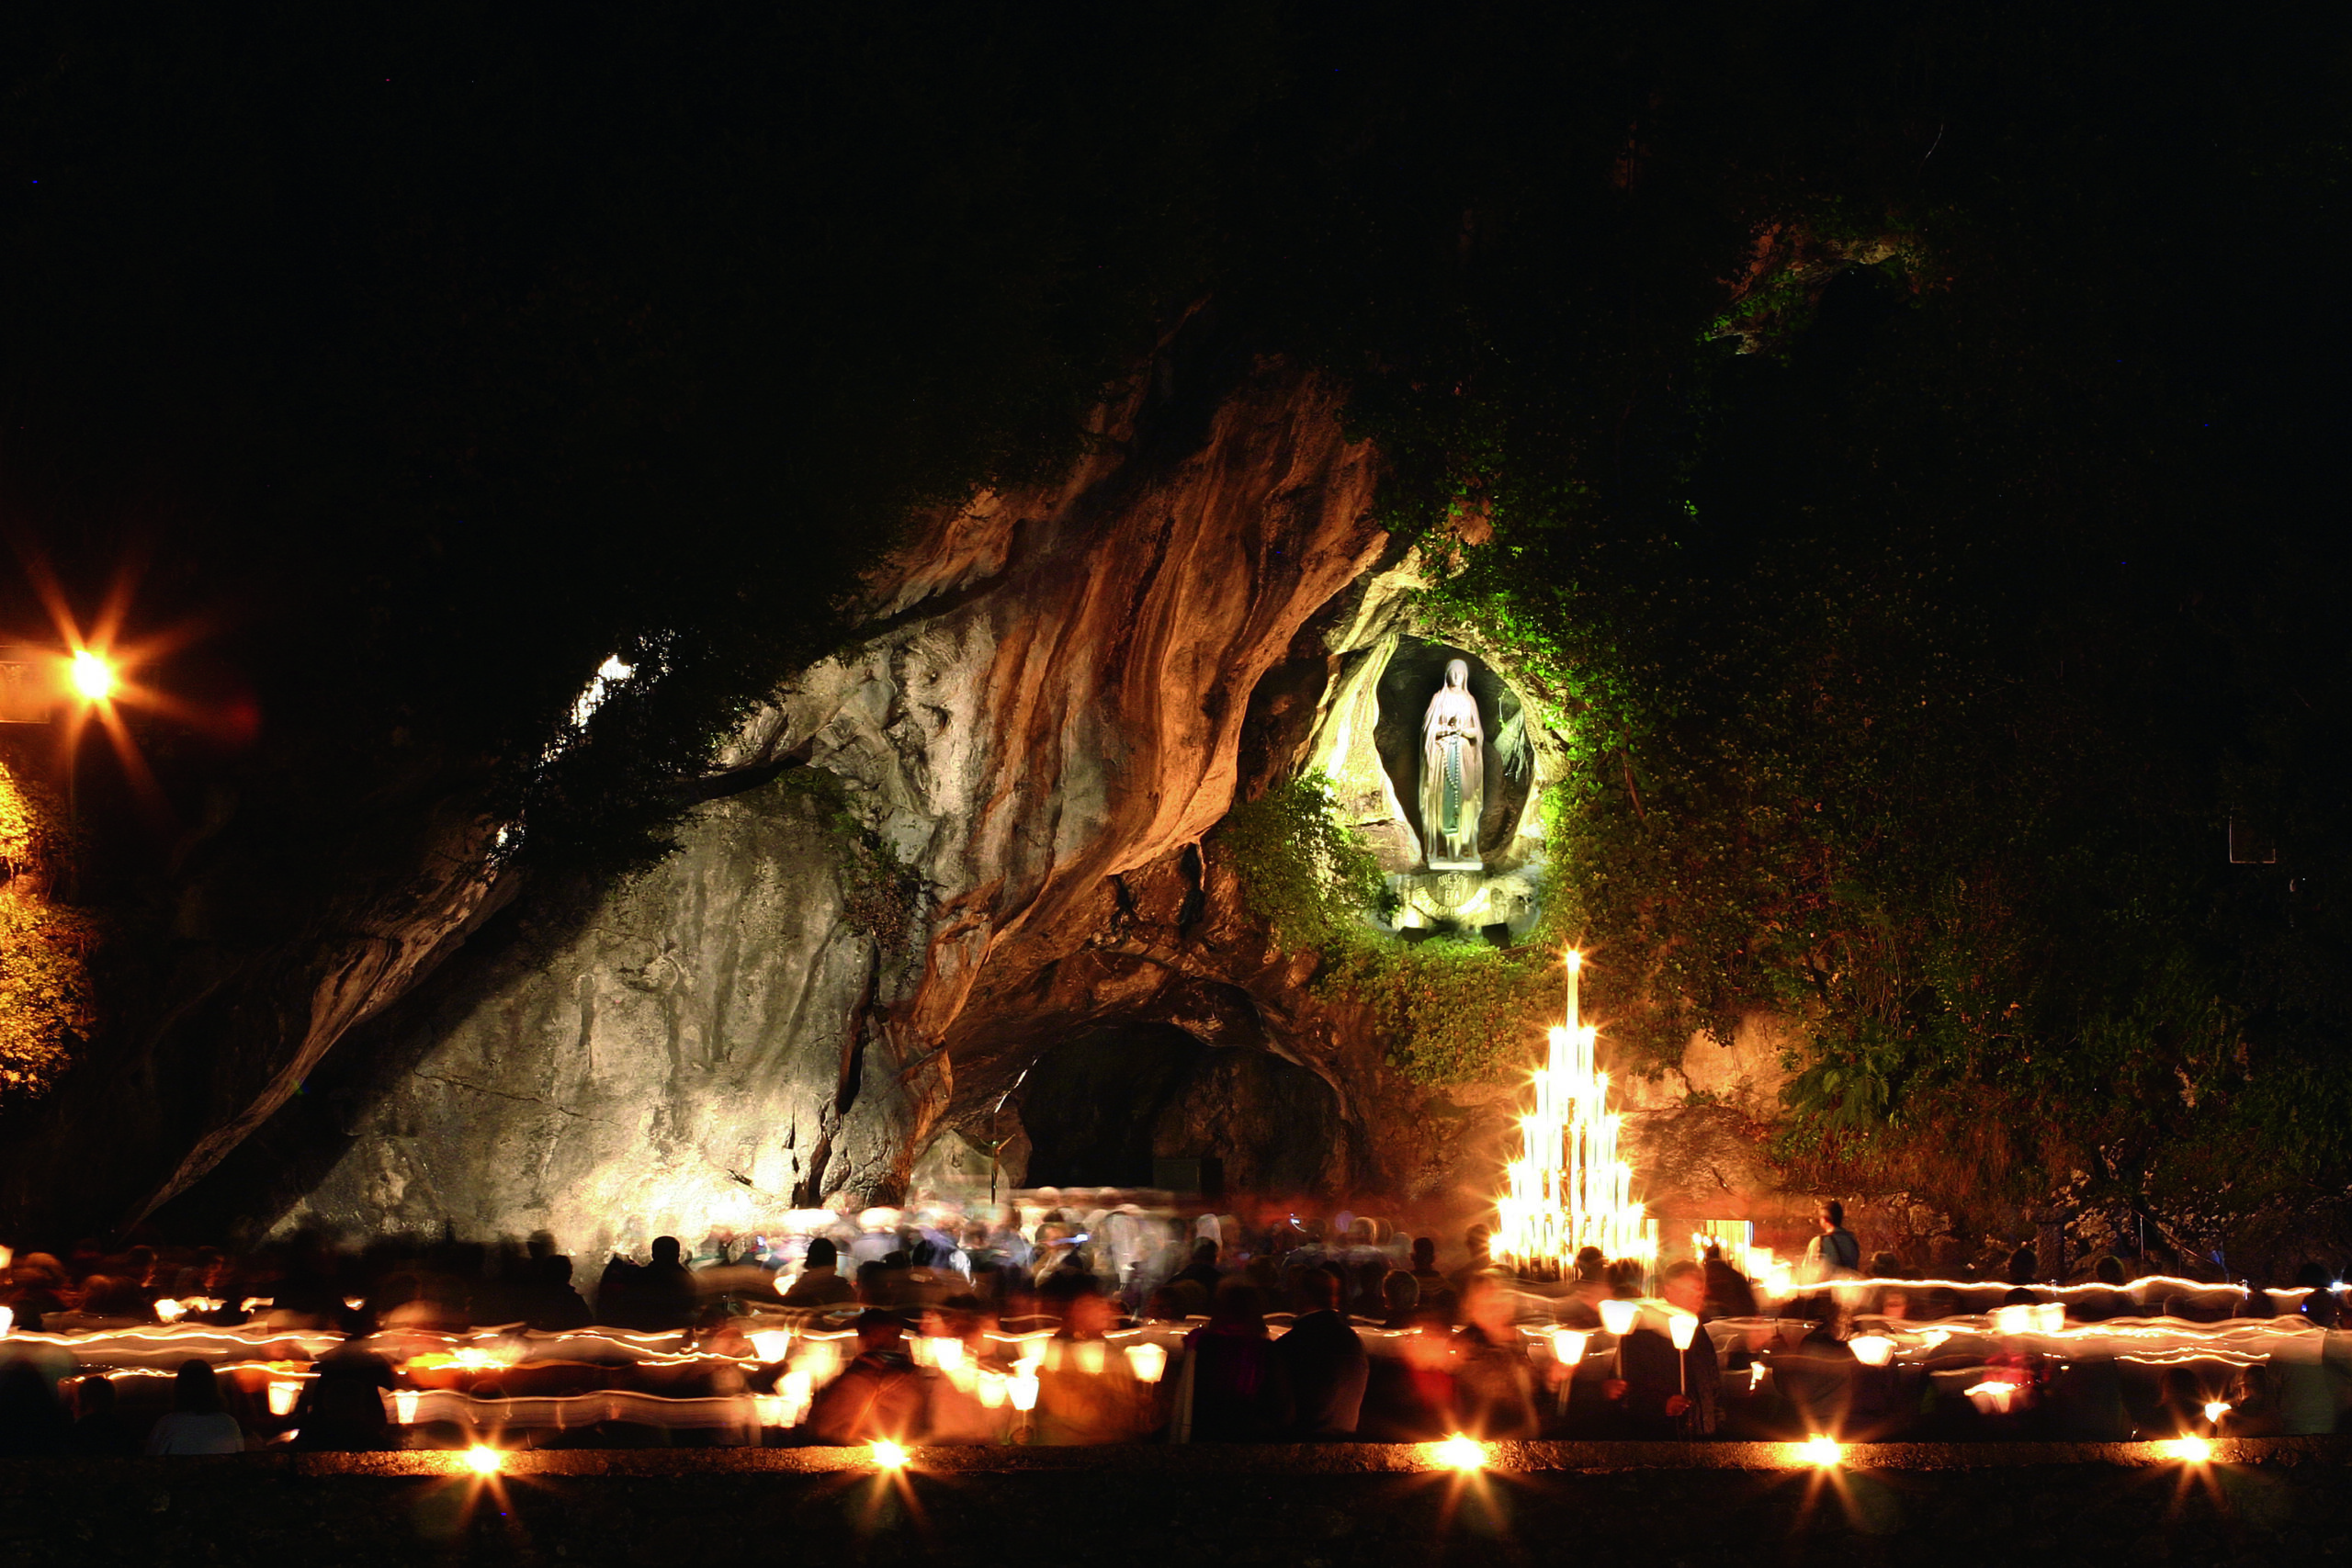 grotto by night